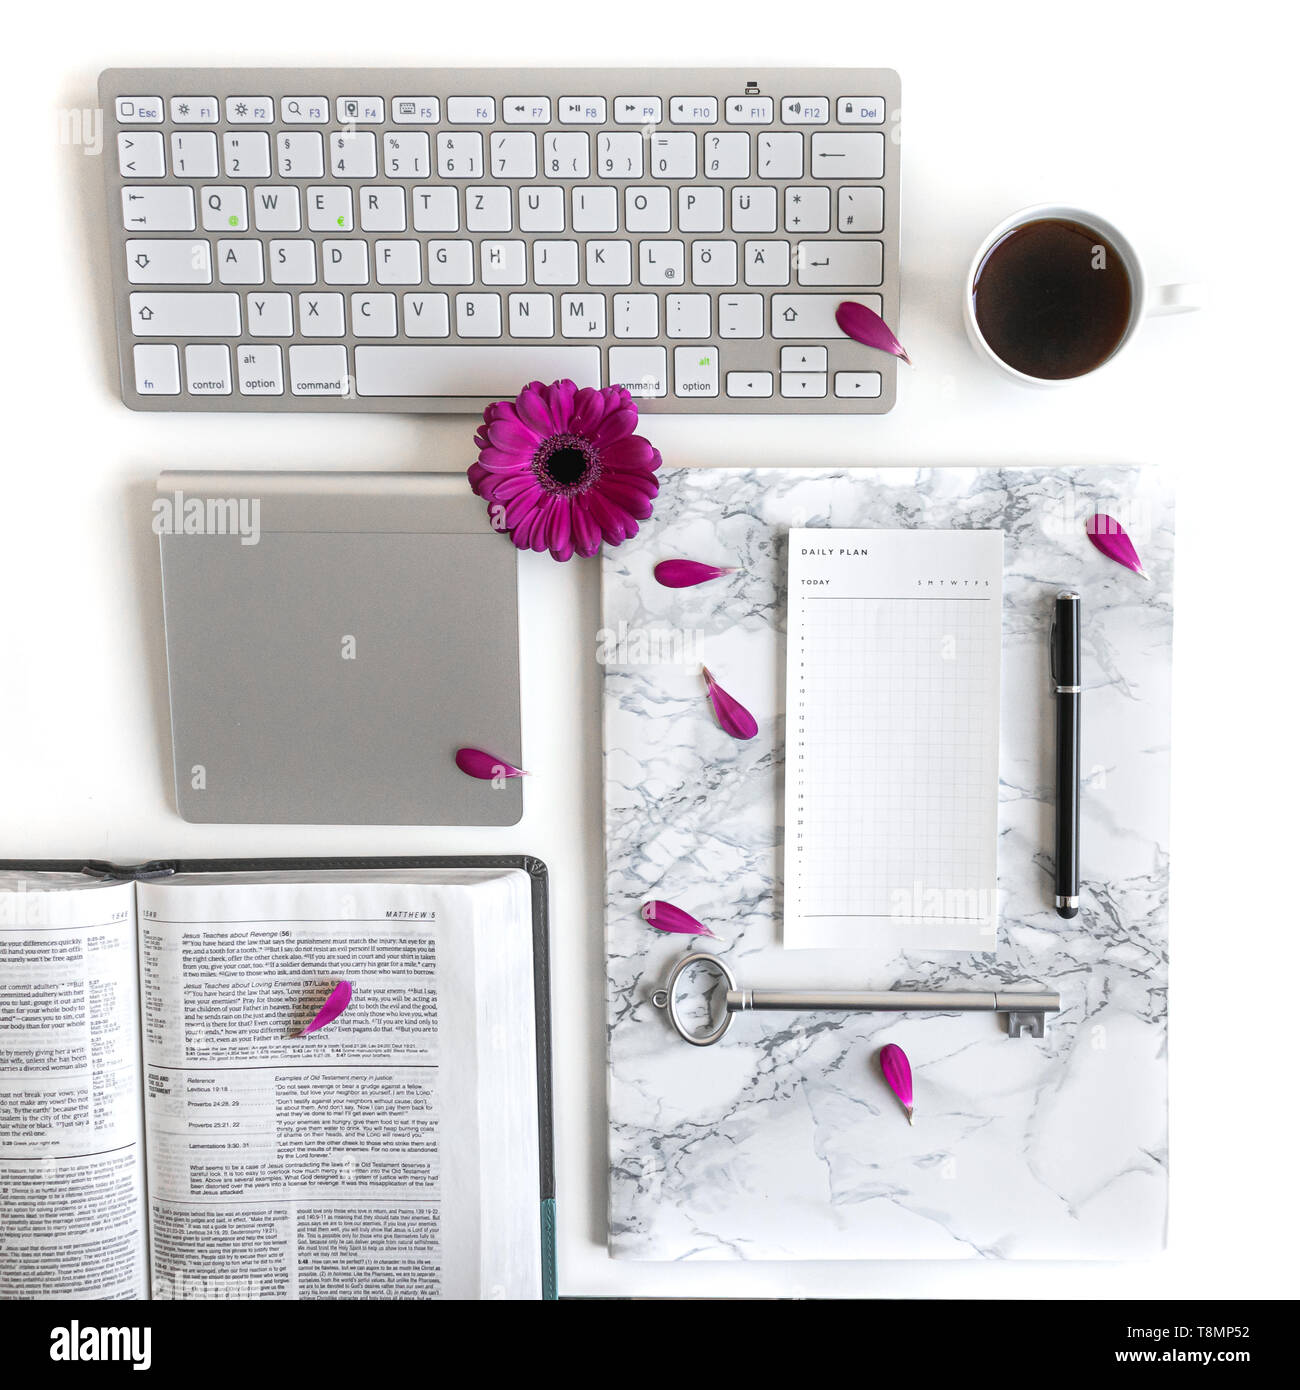 Flat lay open Bible or book and pink, purple, violet, red Gerbera flower on a white background. With pink petals, keyboard, black tea, to do list Stock Photo